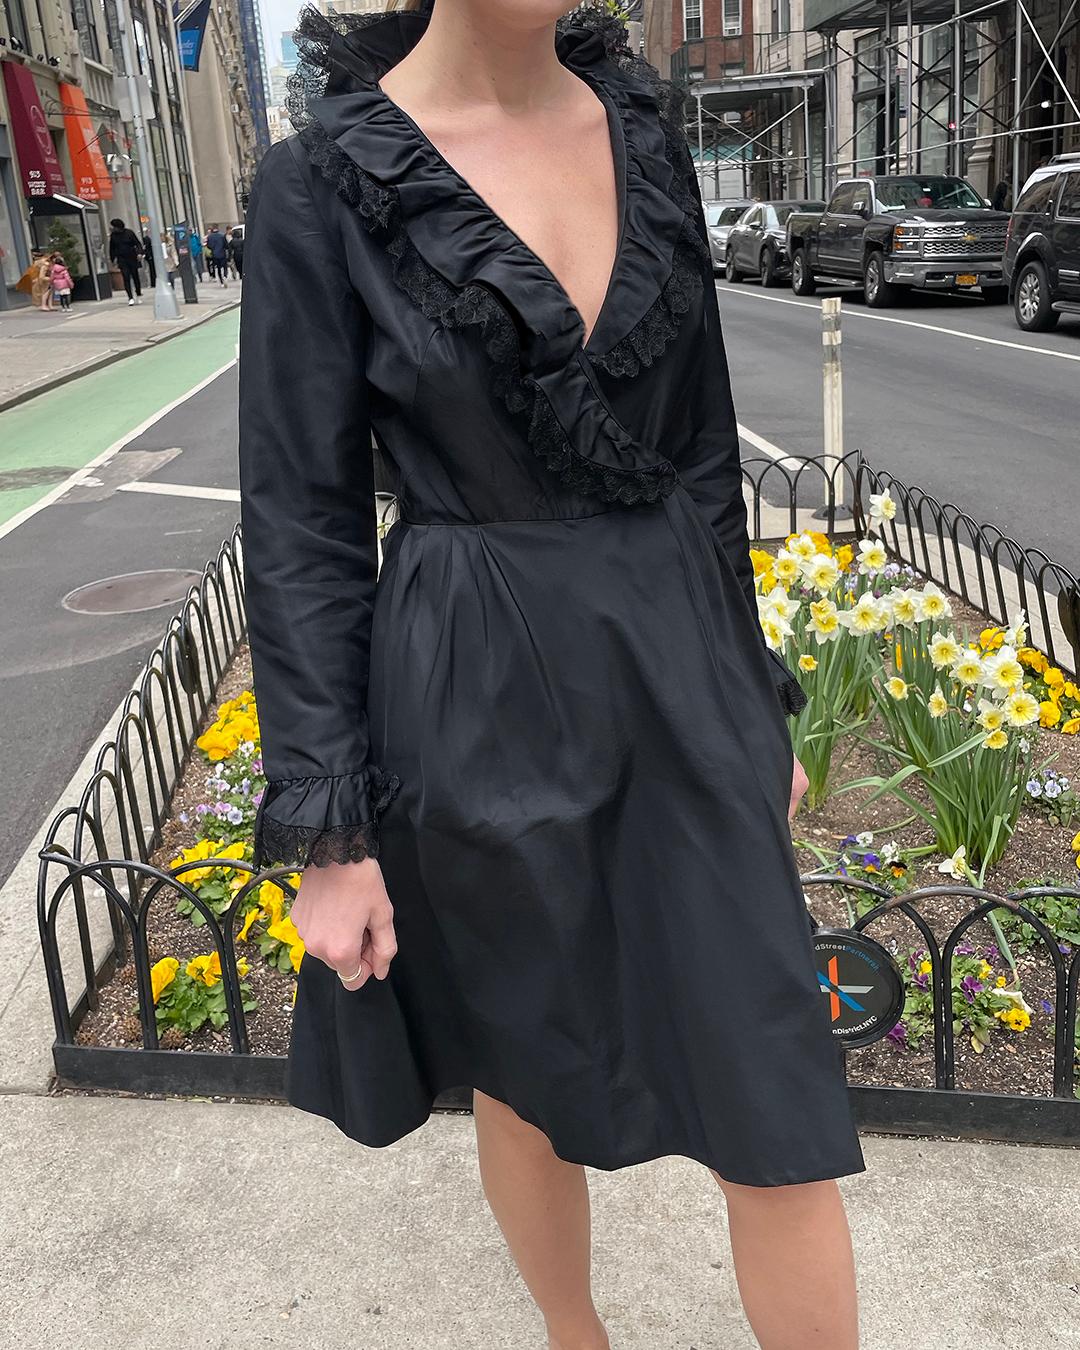 This dress is so incredibly timeless and chic: exactly the kind of piece you want to invest in, that you'll never tire of wearing. Made by Joseph Magnin in the 1960s, it's made of lustrous silk taffeta fabric, with a nipped waist, full skirt, and